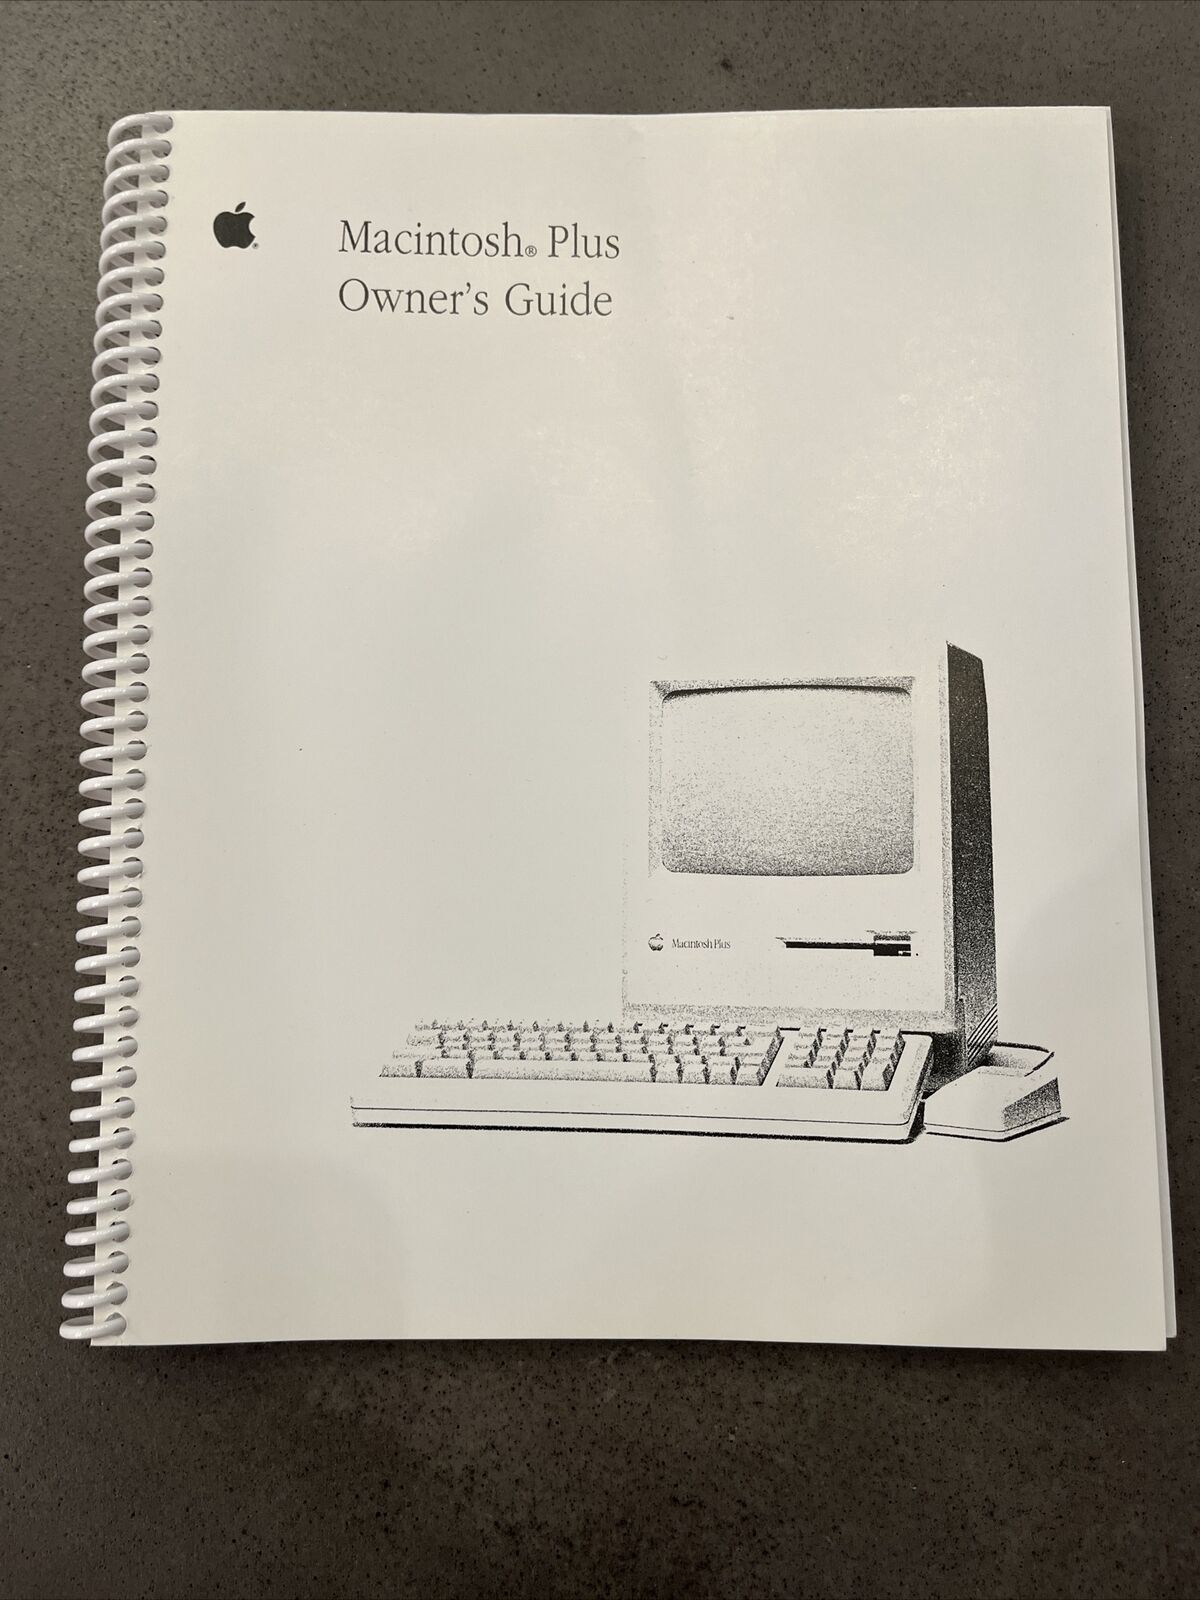 Macintosh Plus Owners Guide Manuals for Apple Computer - New 101 Pages